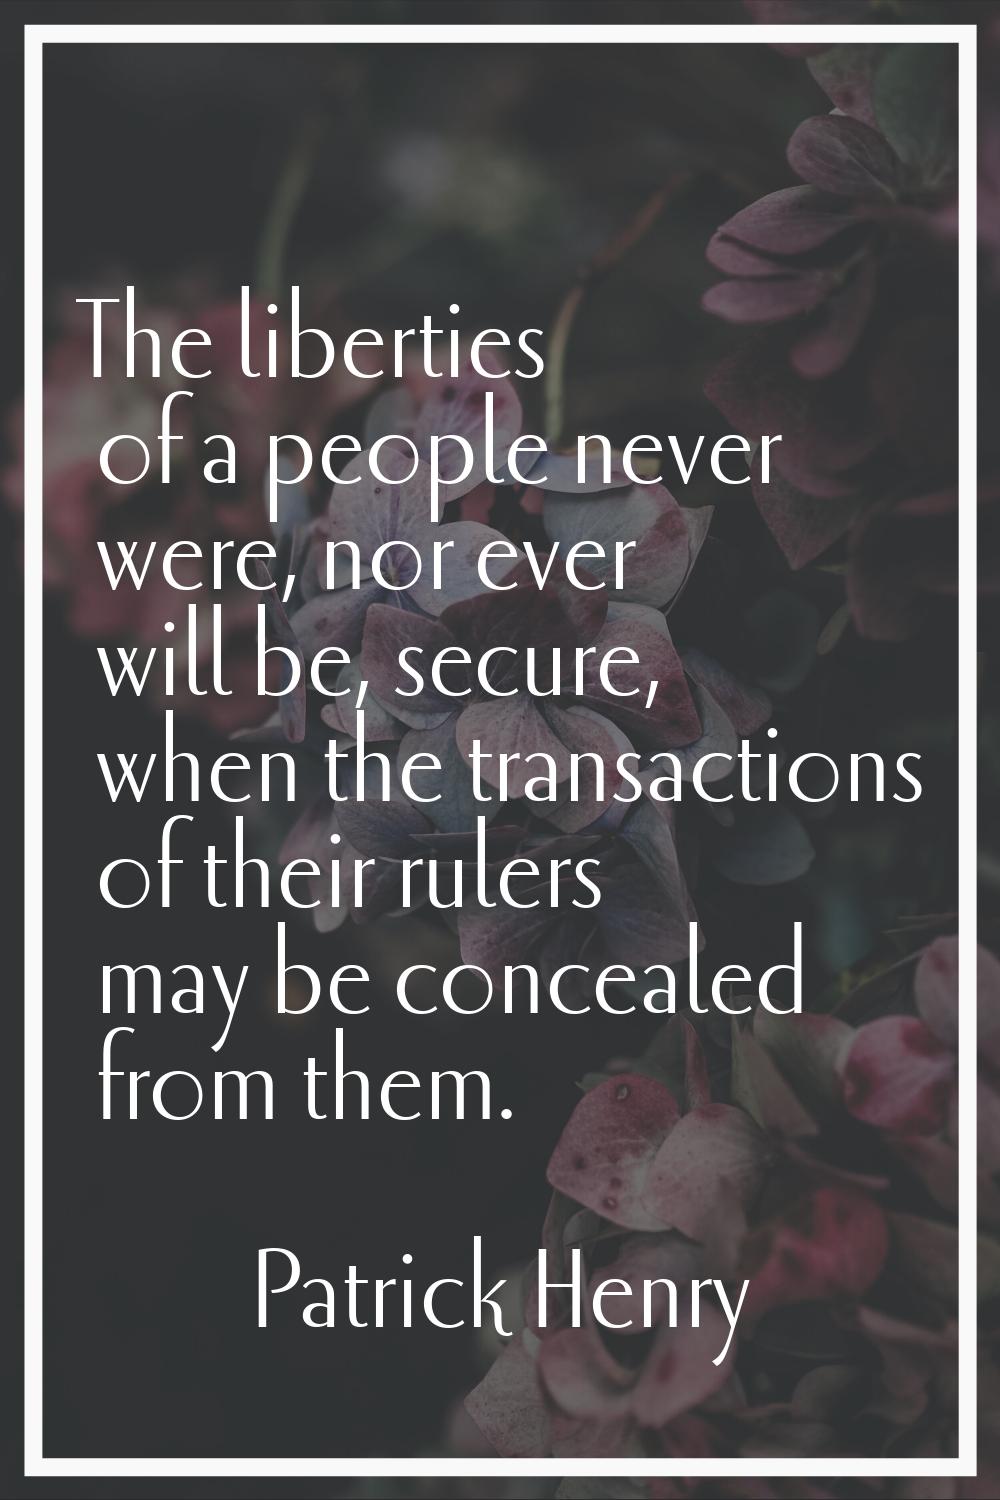 The liberties of a people never were, nor ever will be, secure, when the transactions of their rule